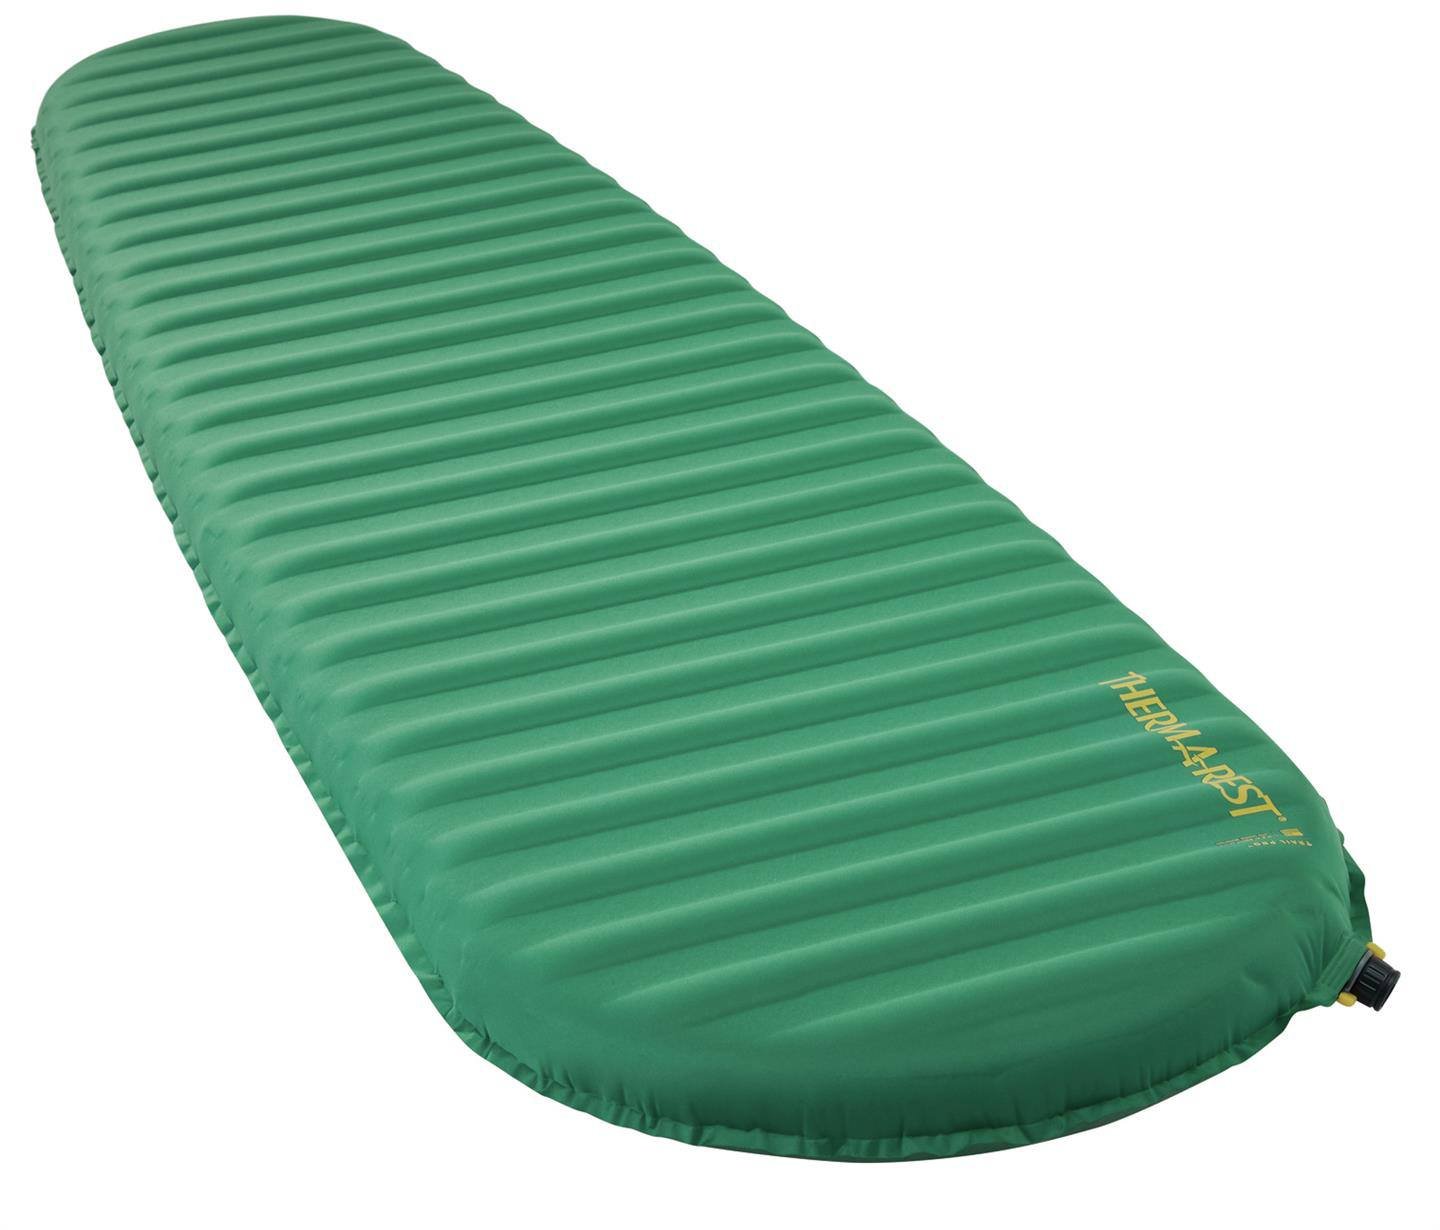 Therm-a-Rest Trail Pro